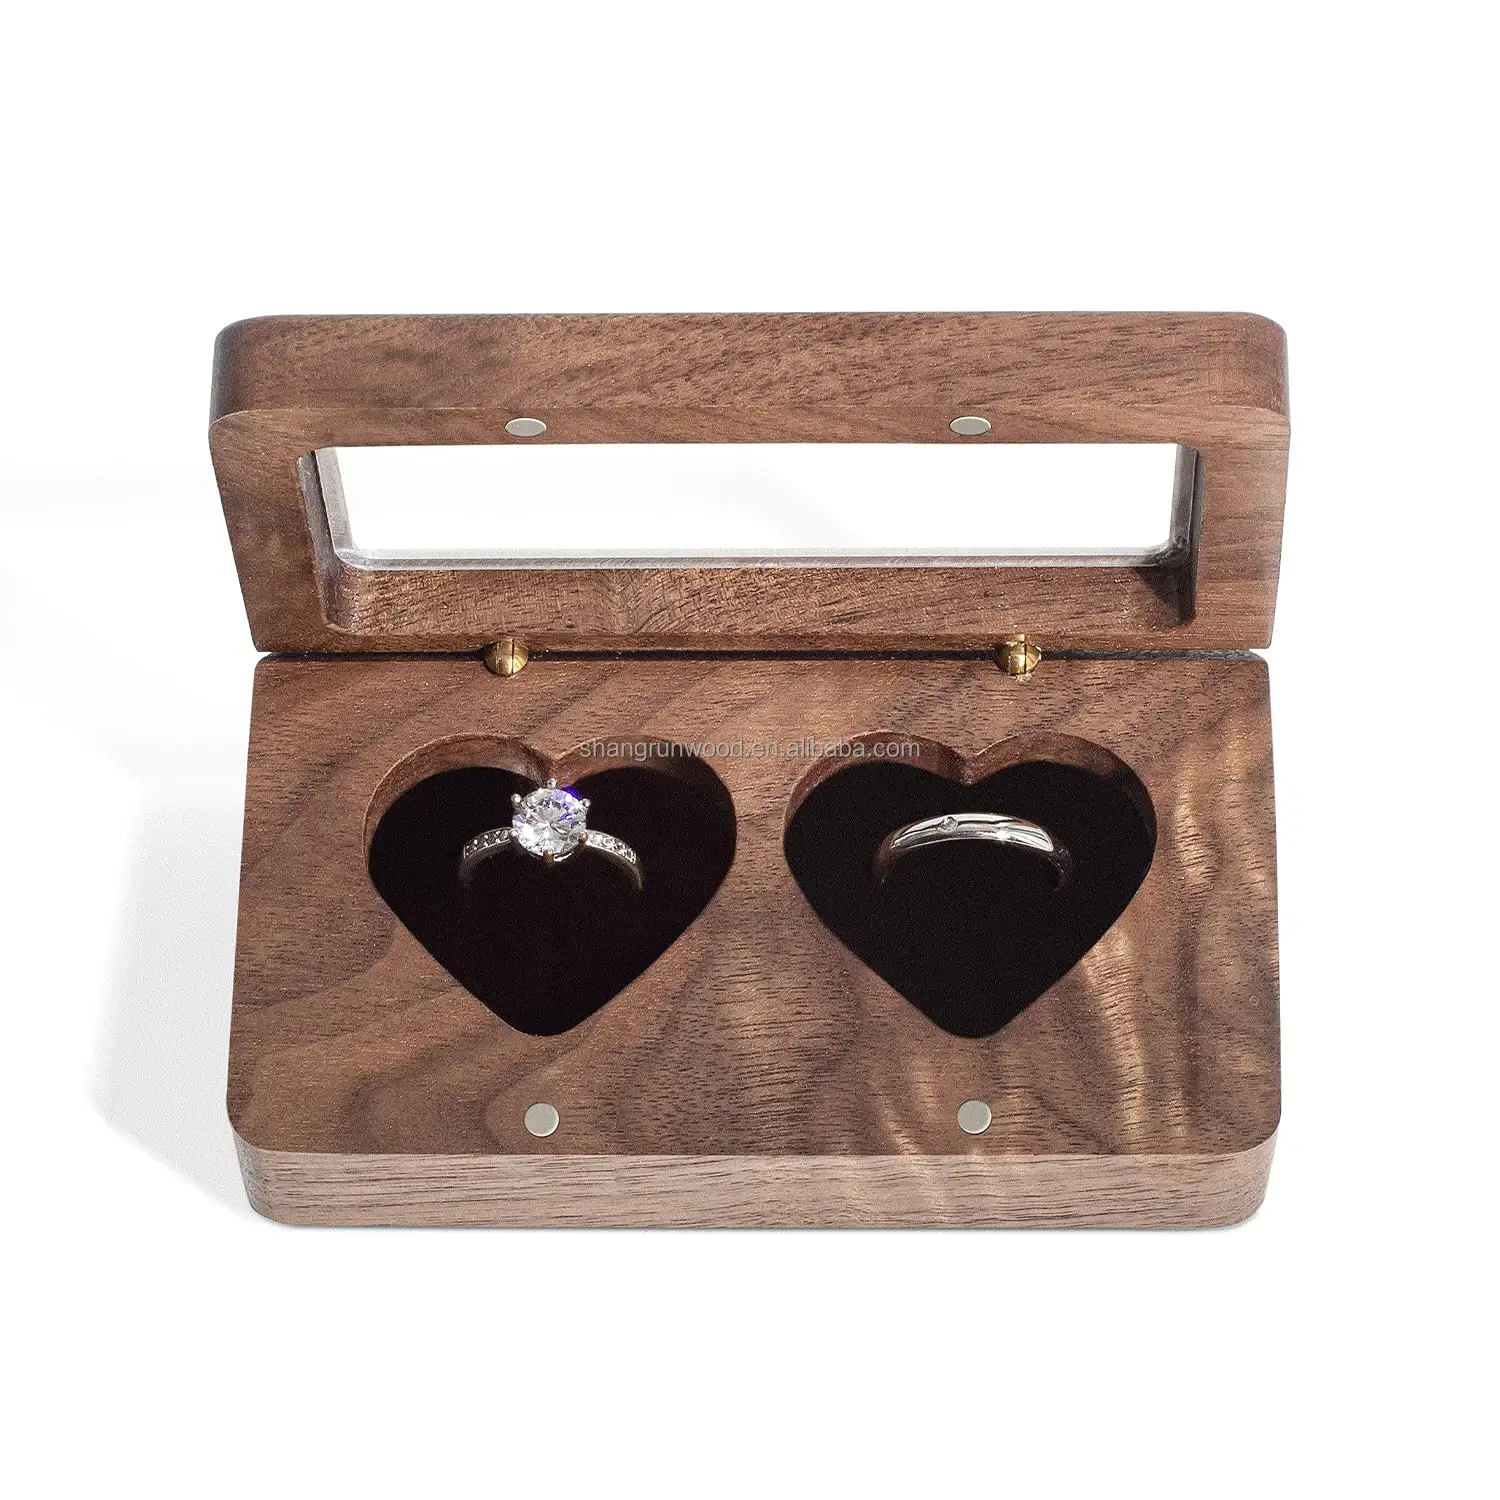 Simple Small Wood Gift Boxes Custom Decorative Case Handmade Wooden Jewelry Ring Storage Box